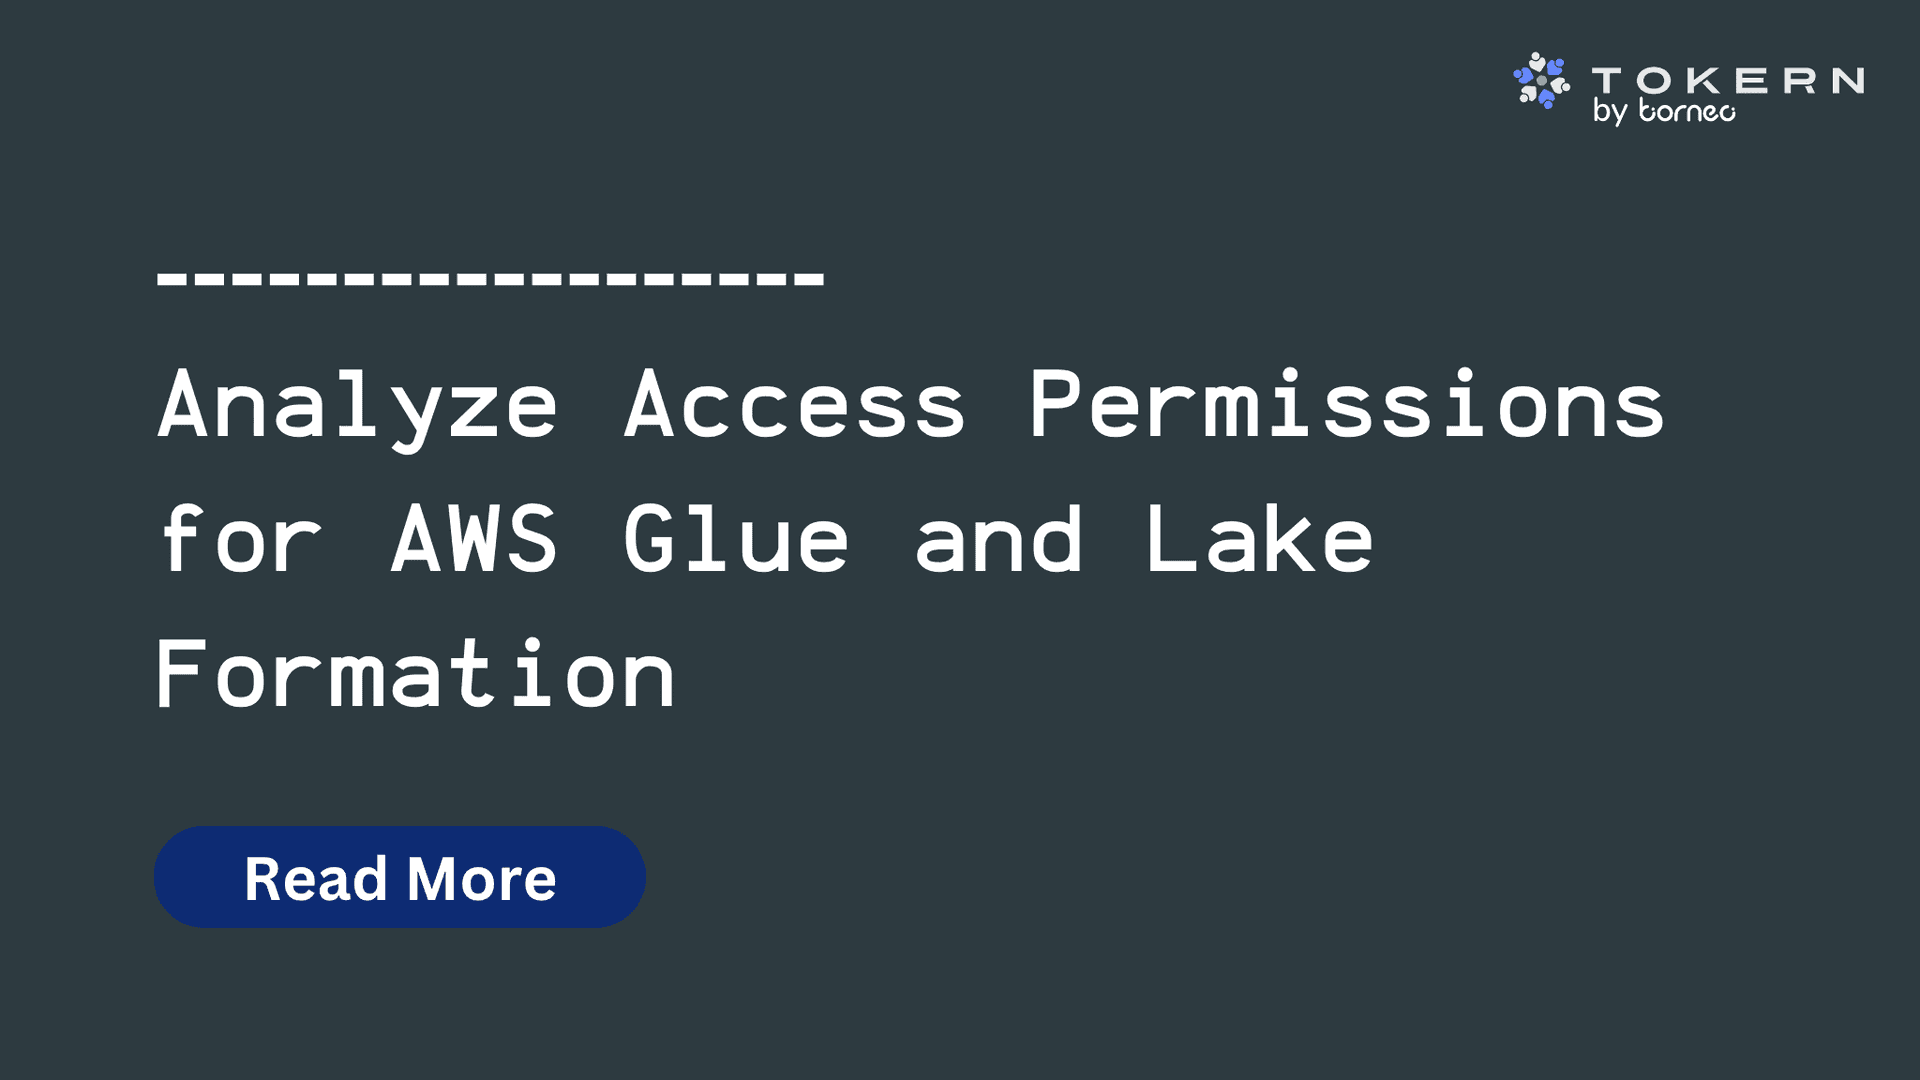 Analyze_Access_Permissions_for_AWS_Glue_and_Lake_Formation_762b1875c2.png